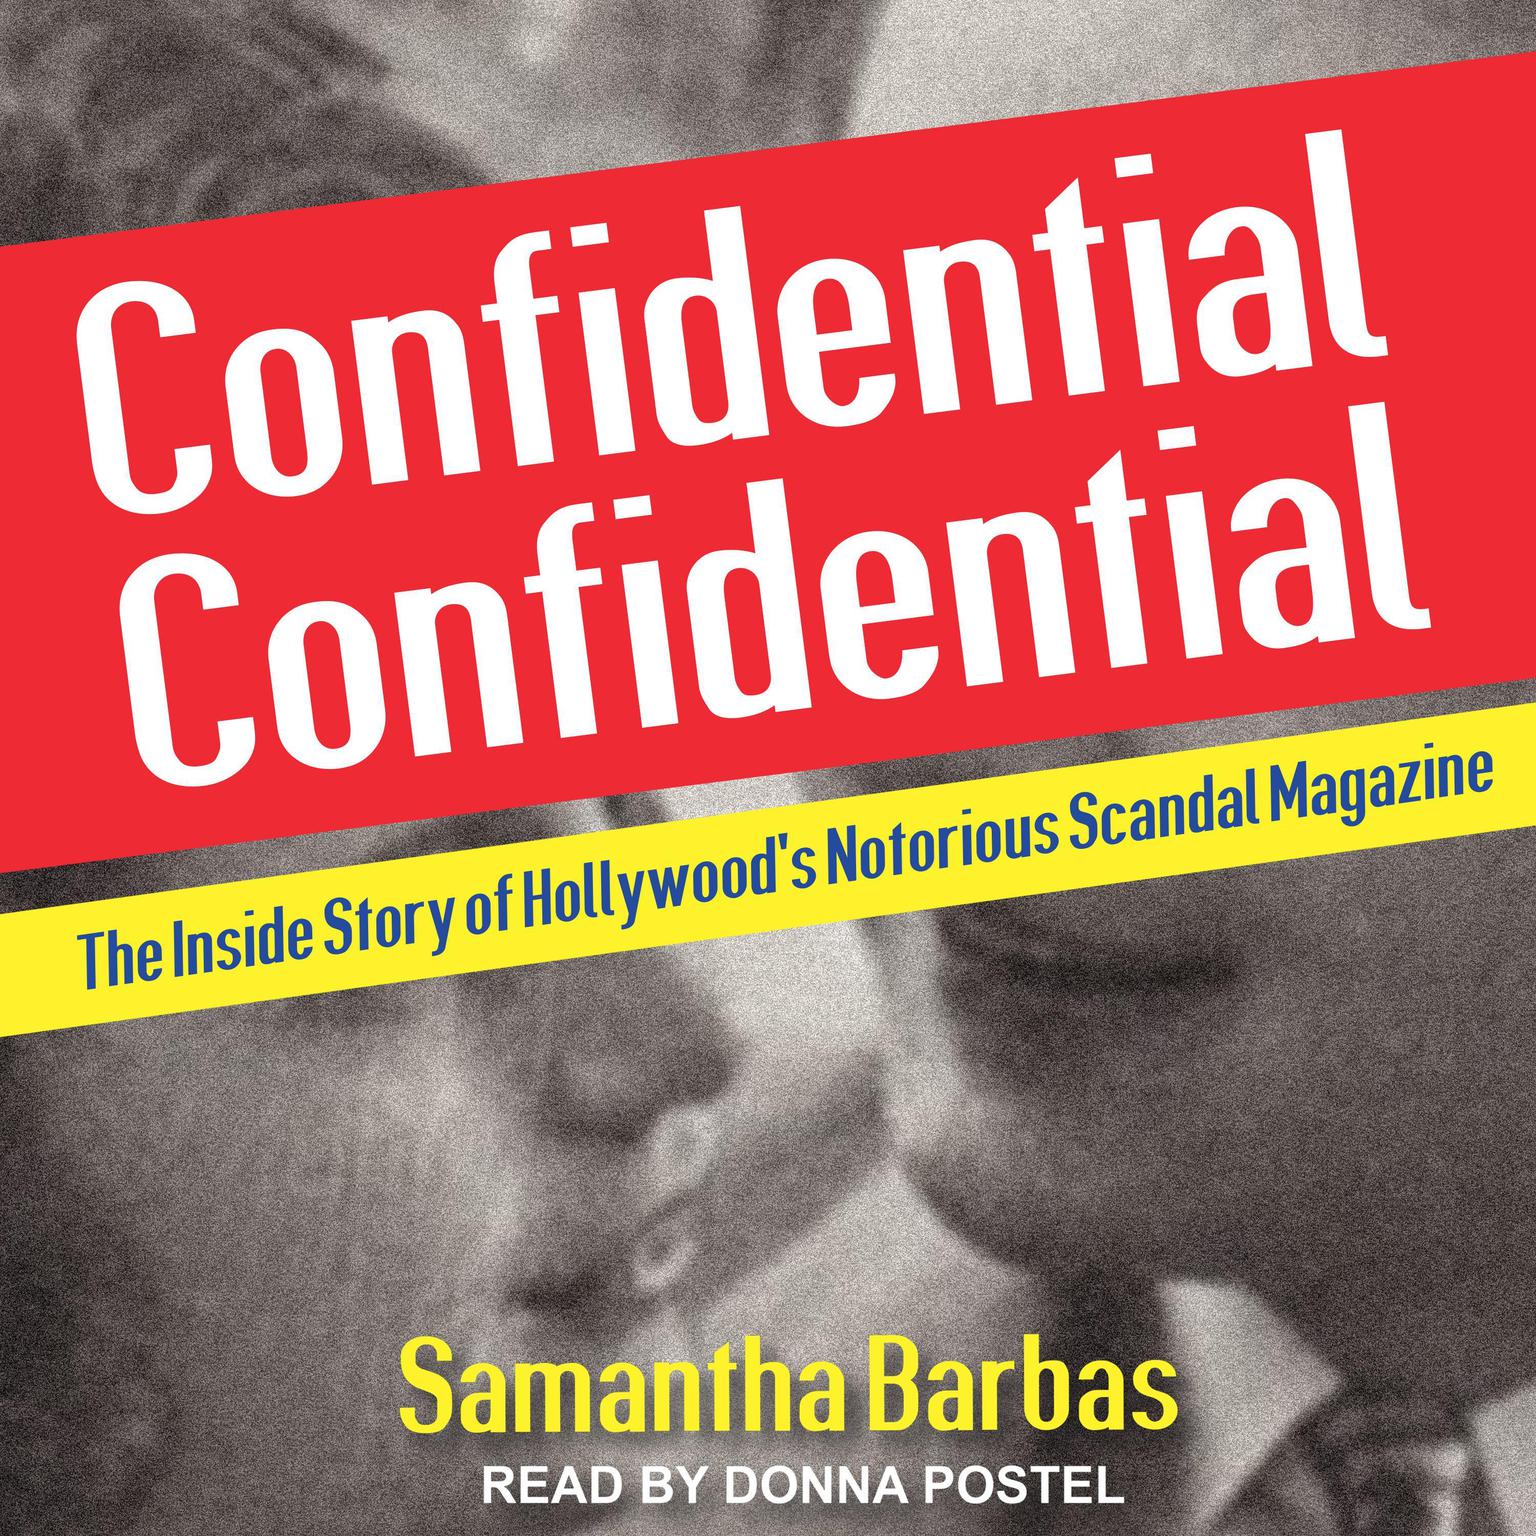 Confidential Confidential: The Inside Story of Hollywoods Notorious Scandal Magazine Audiobook, by Samantha Barbas